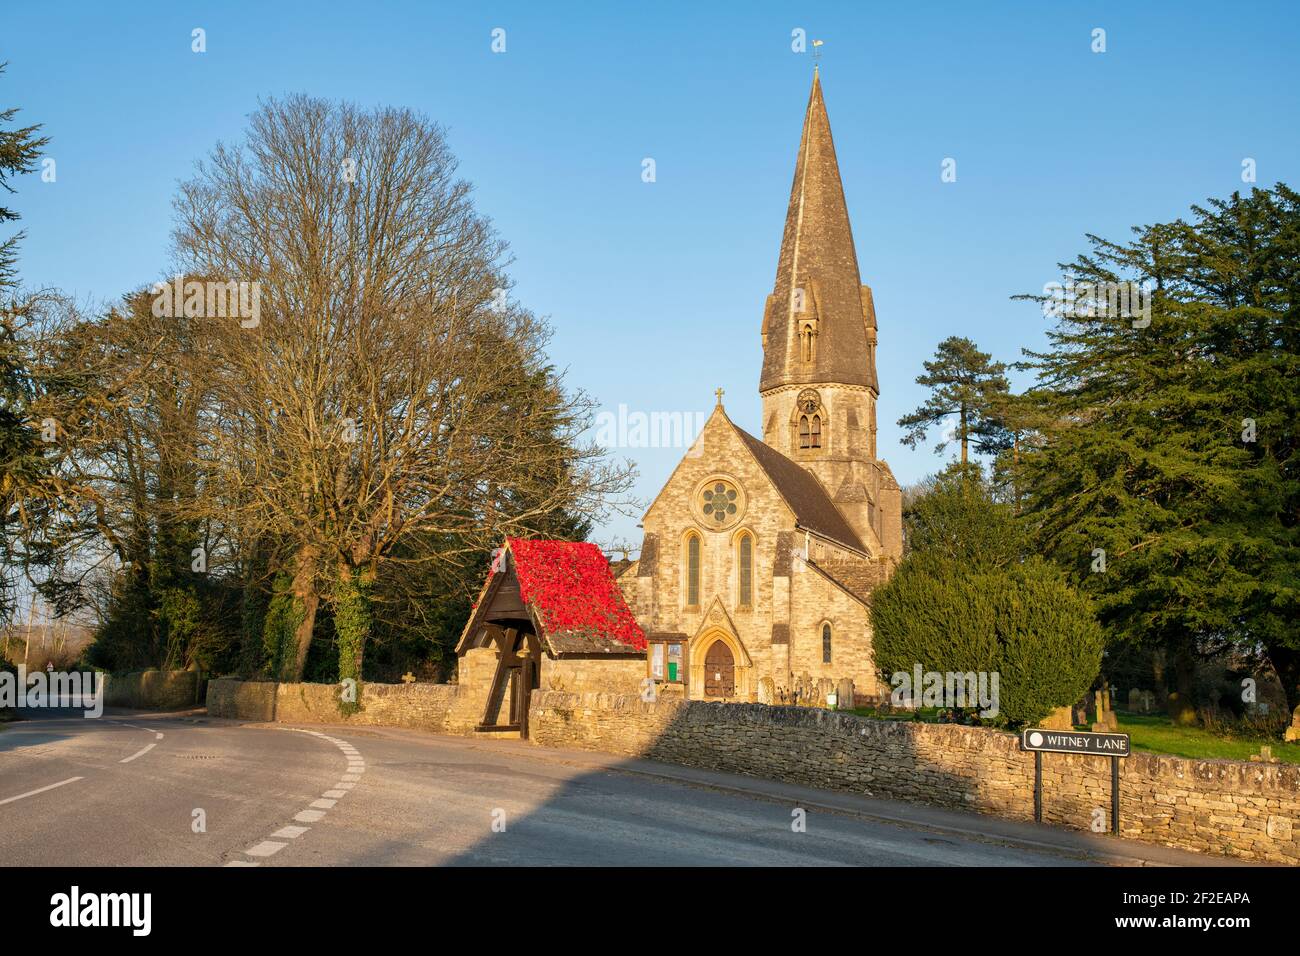 St Michael and All Angels Church at sunset. Leafield, Cotswolds, Oxfordshire, England Stock Photo